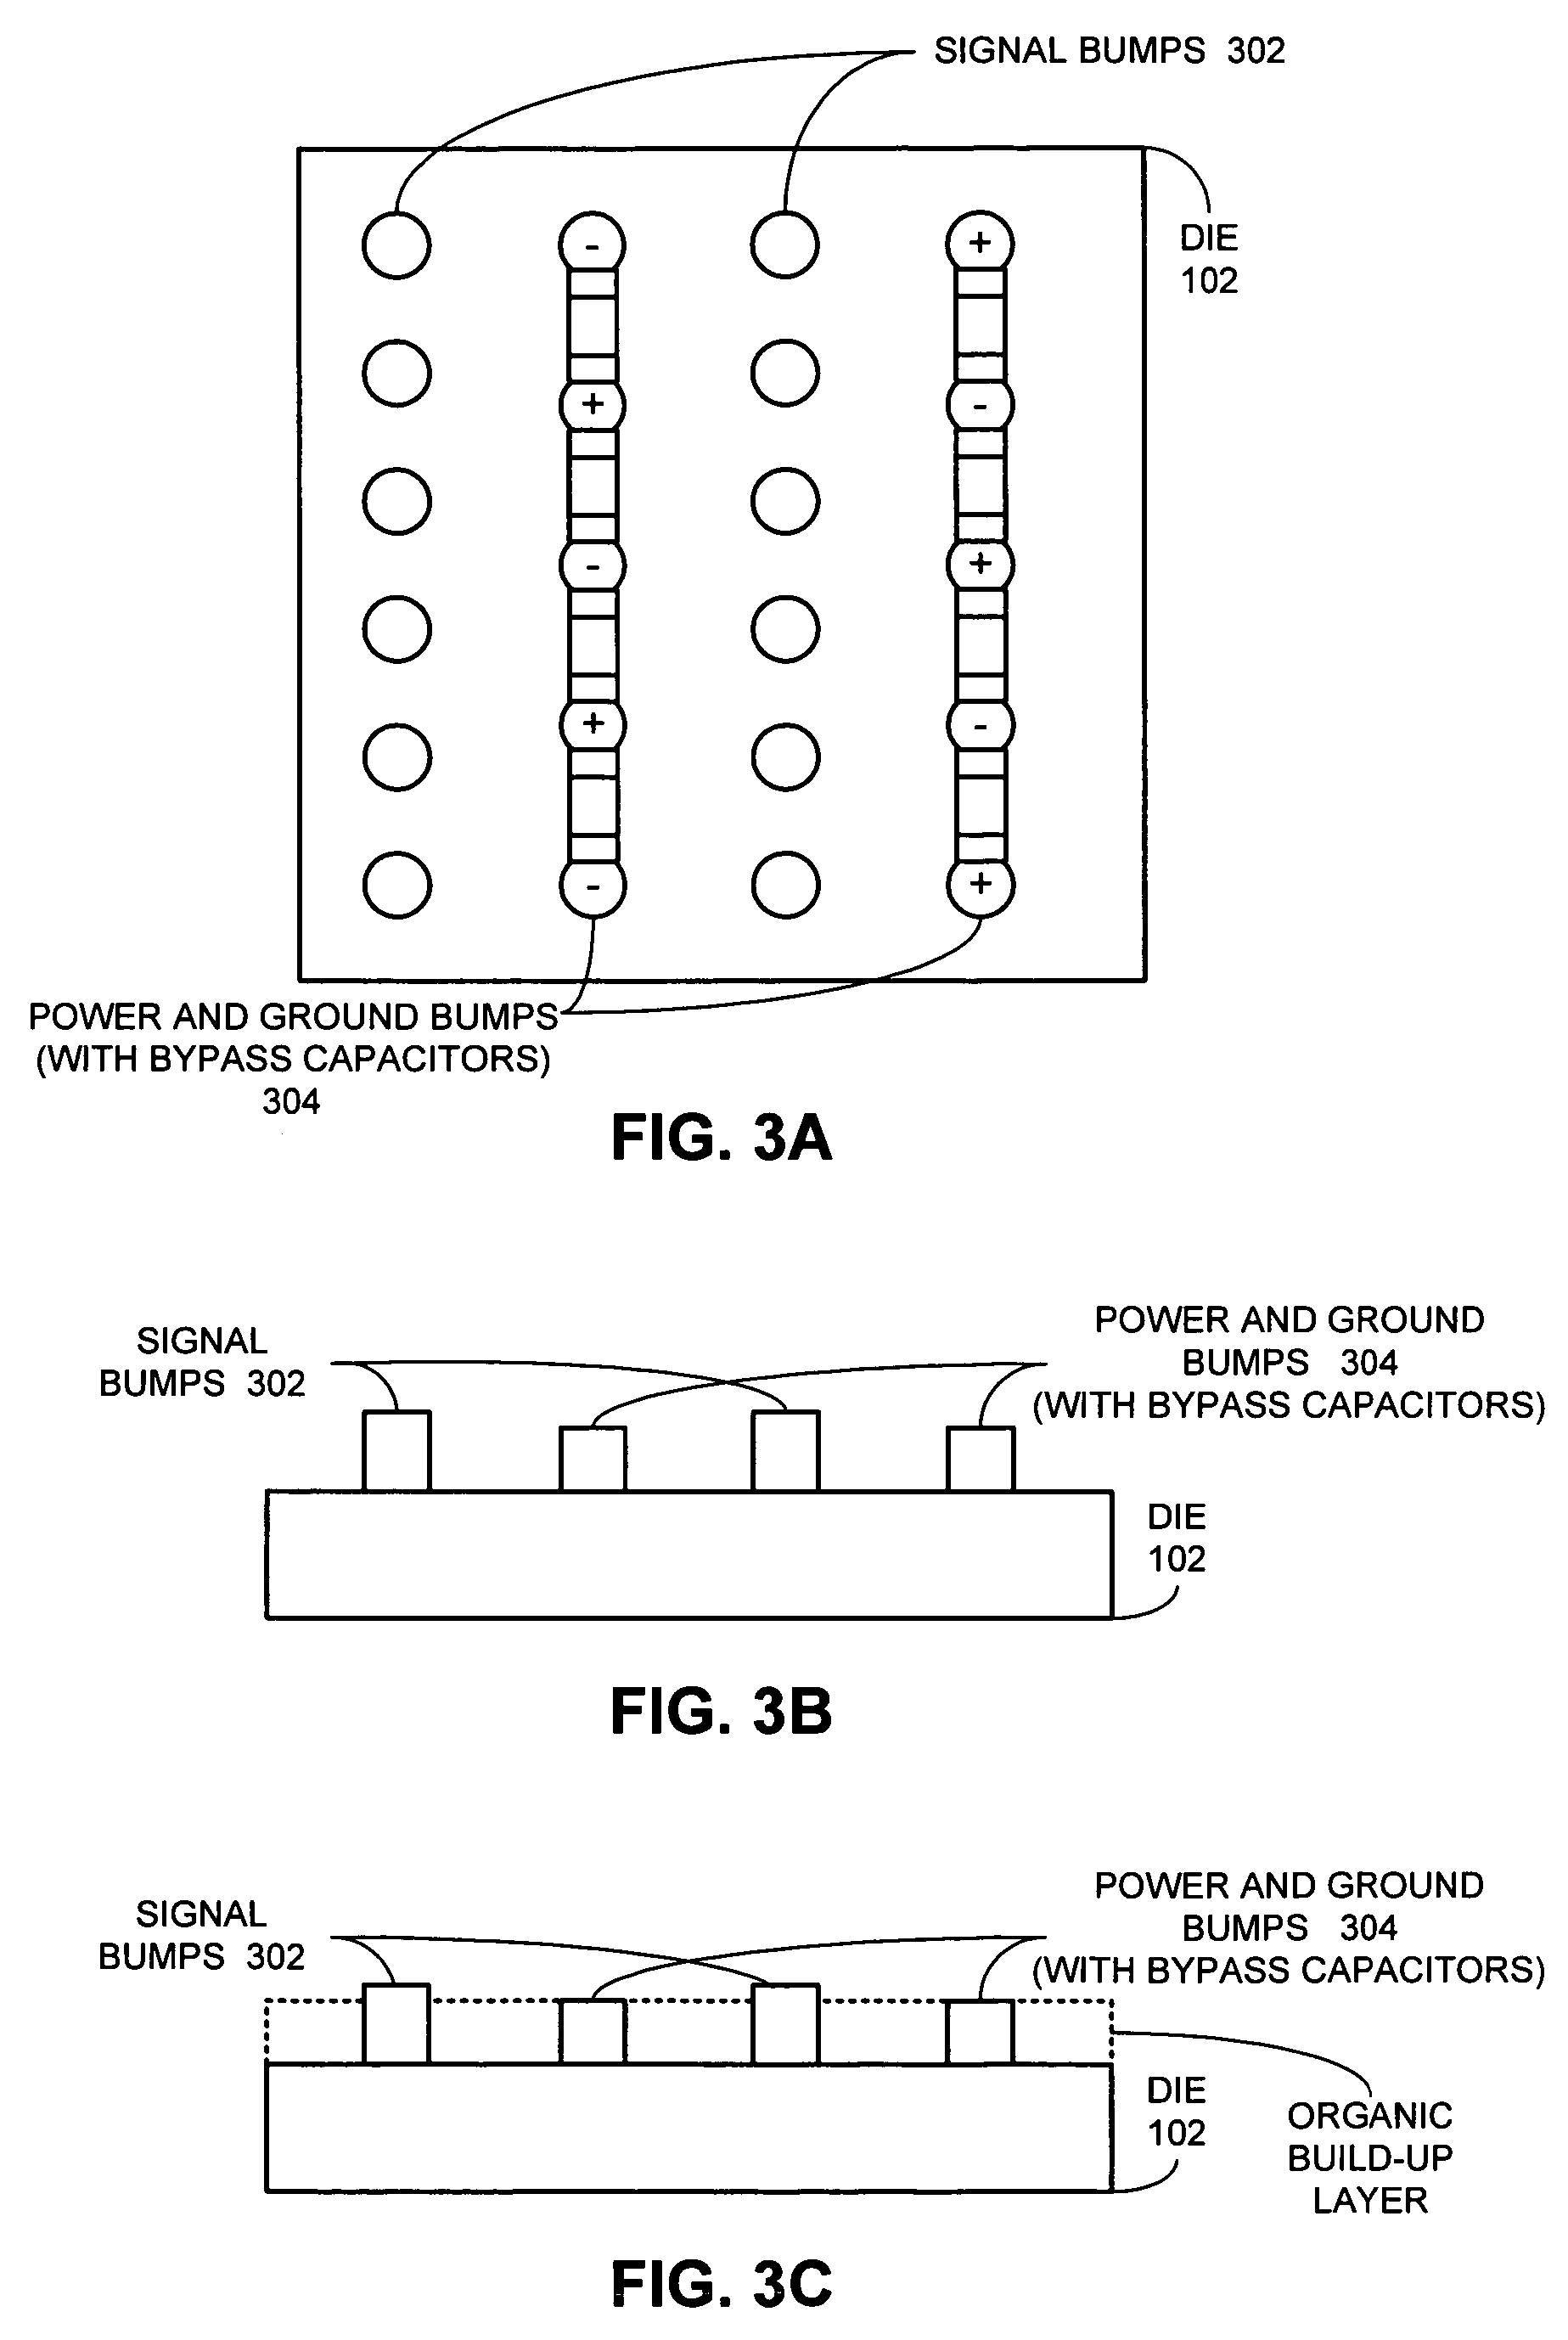 Apparatus for providing capacitive decoupling between on-die power and ground conductors